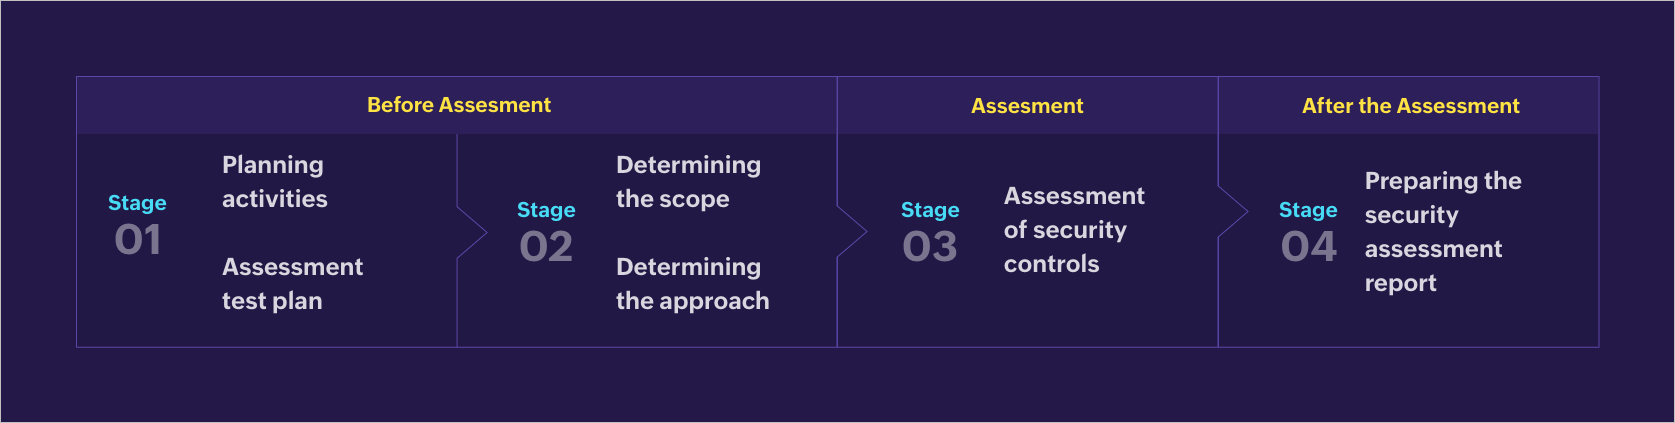 Three stages involved in the Essential Eight assessment procedure